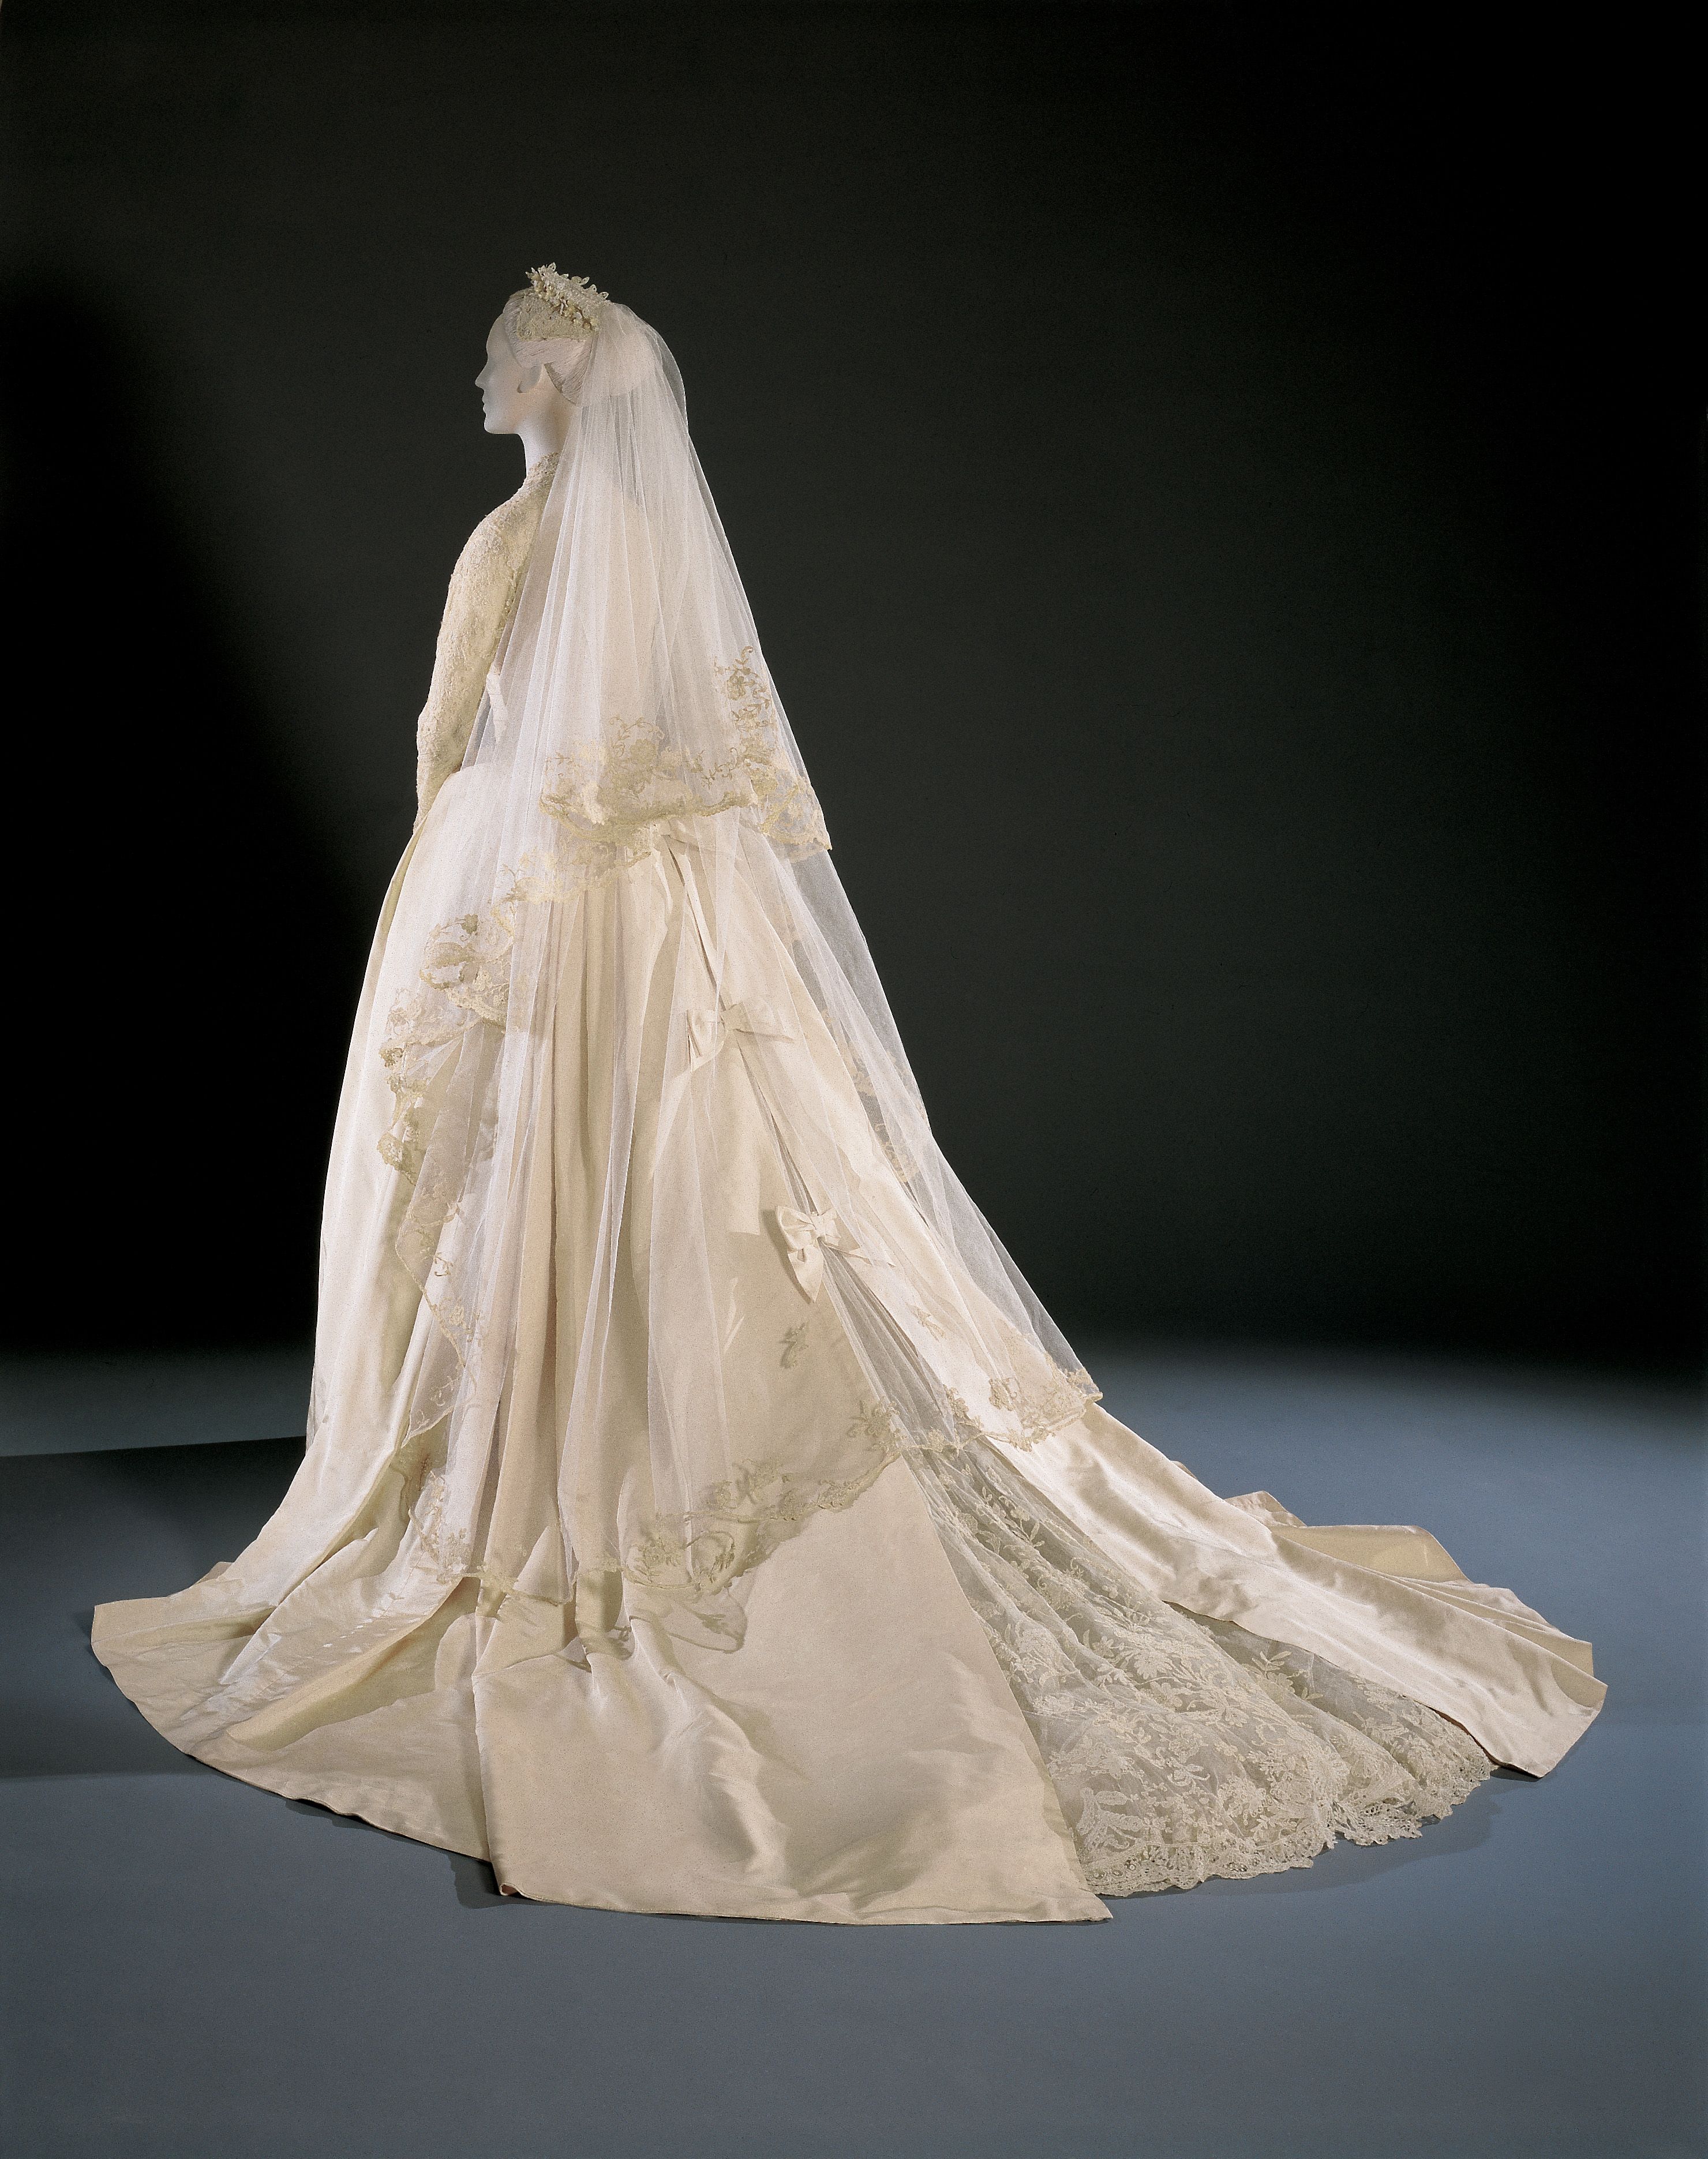 Porcelain Portrait of Grace Kelly in Her Wedding Gown by Martha Thompson